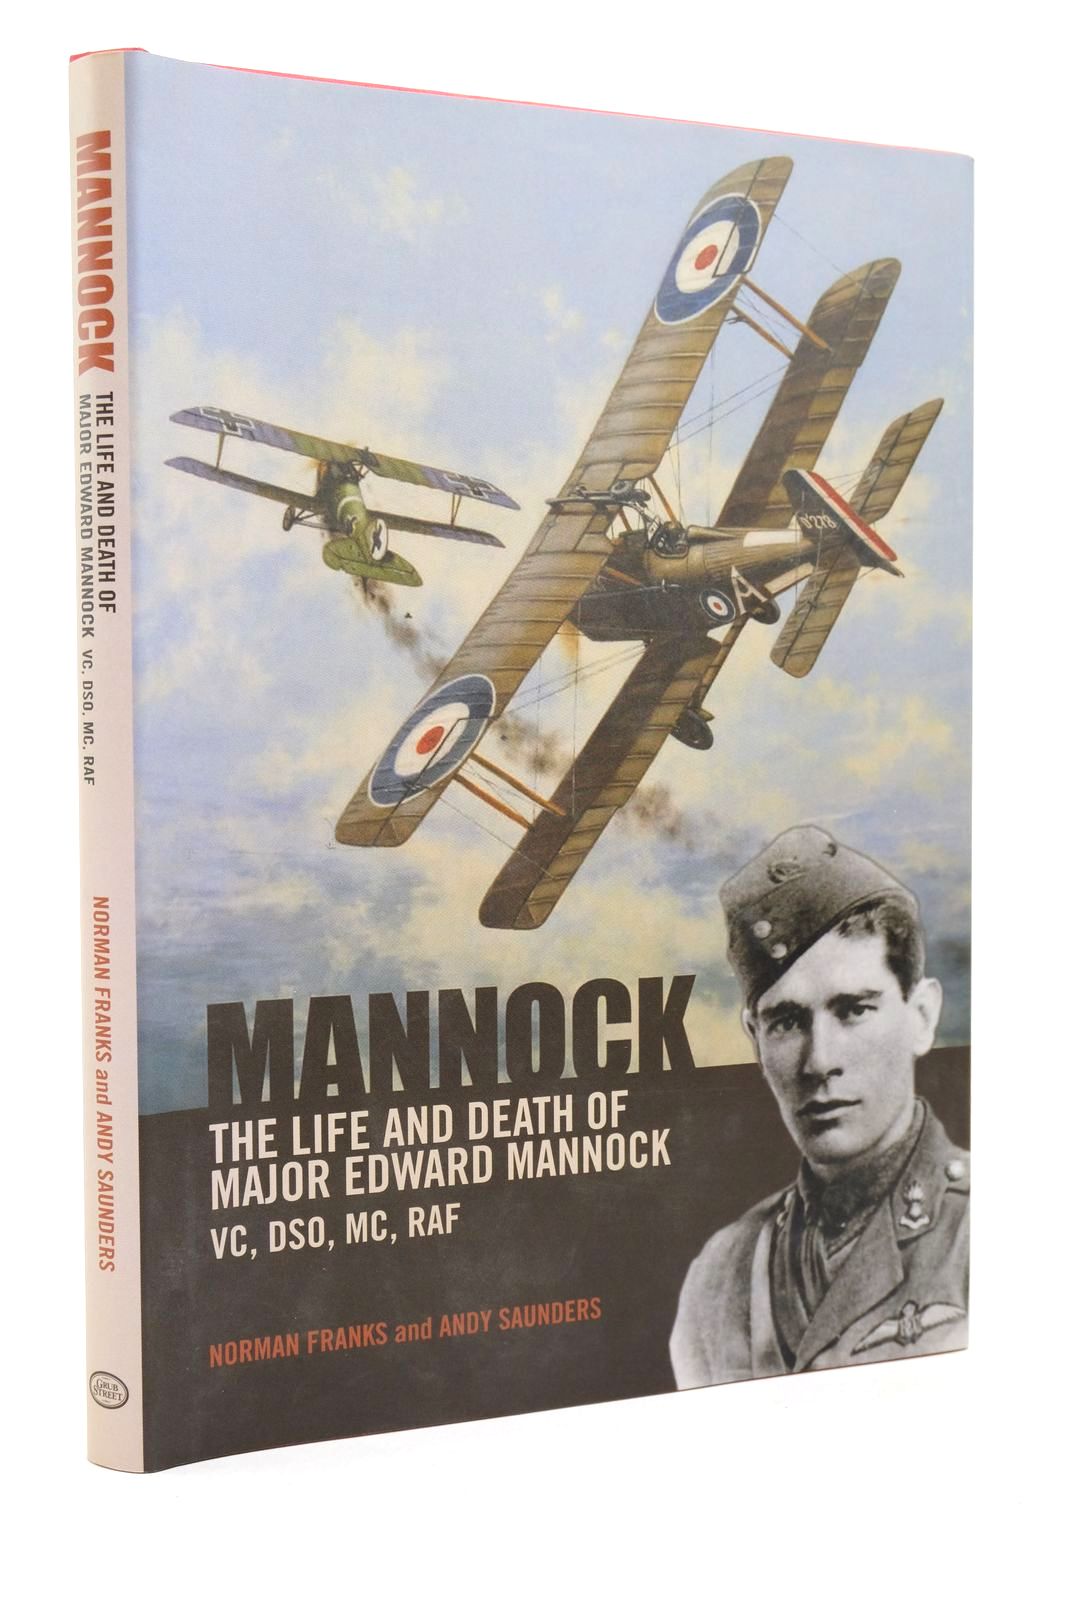 Photo of MANNOCK: THE LIFE AND DEATH OF MAJOR EDWARD MANNOCK VC DSO MC RAF written by Franks, Norman Saunders, Andy published by Grub Street (STOCK CODE: 2139819)  for sale by Stella & Rose's Books